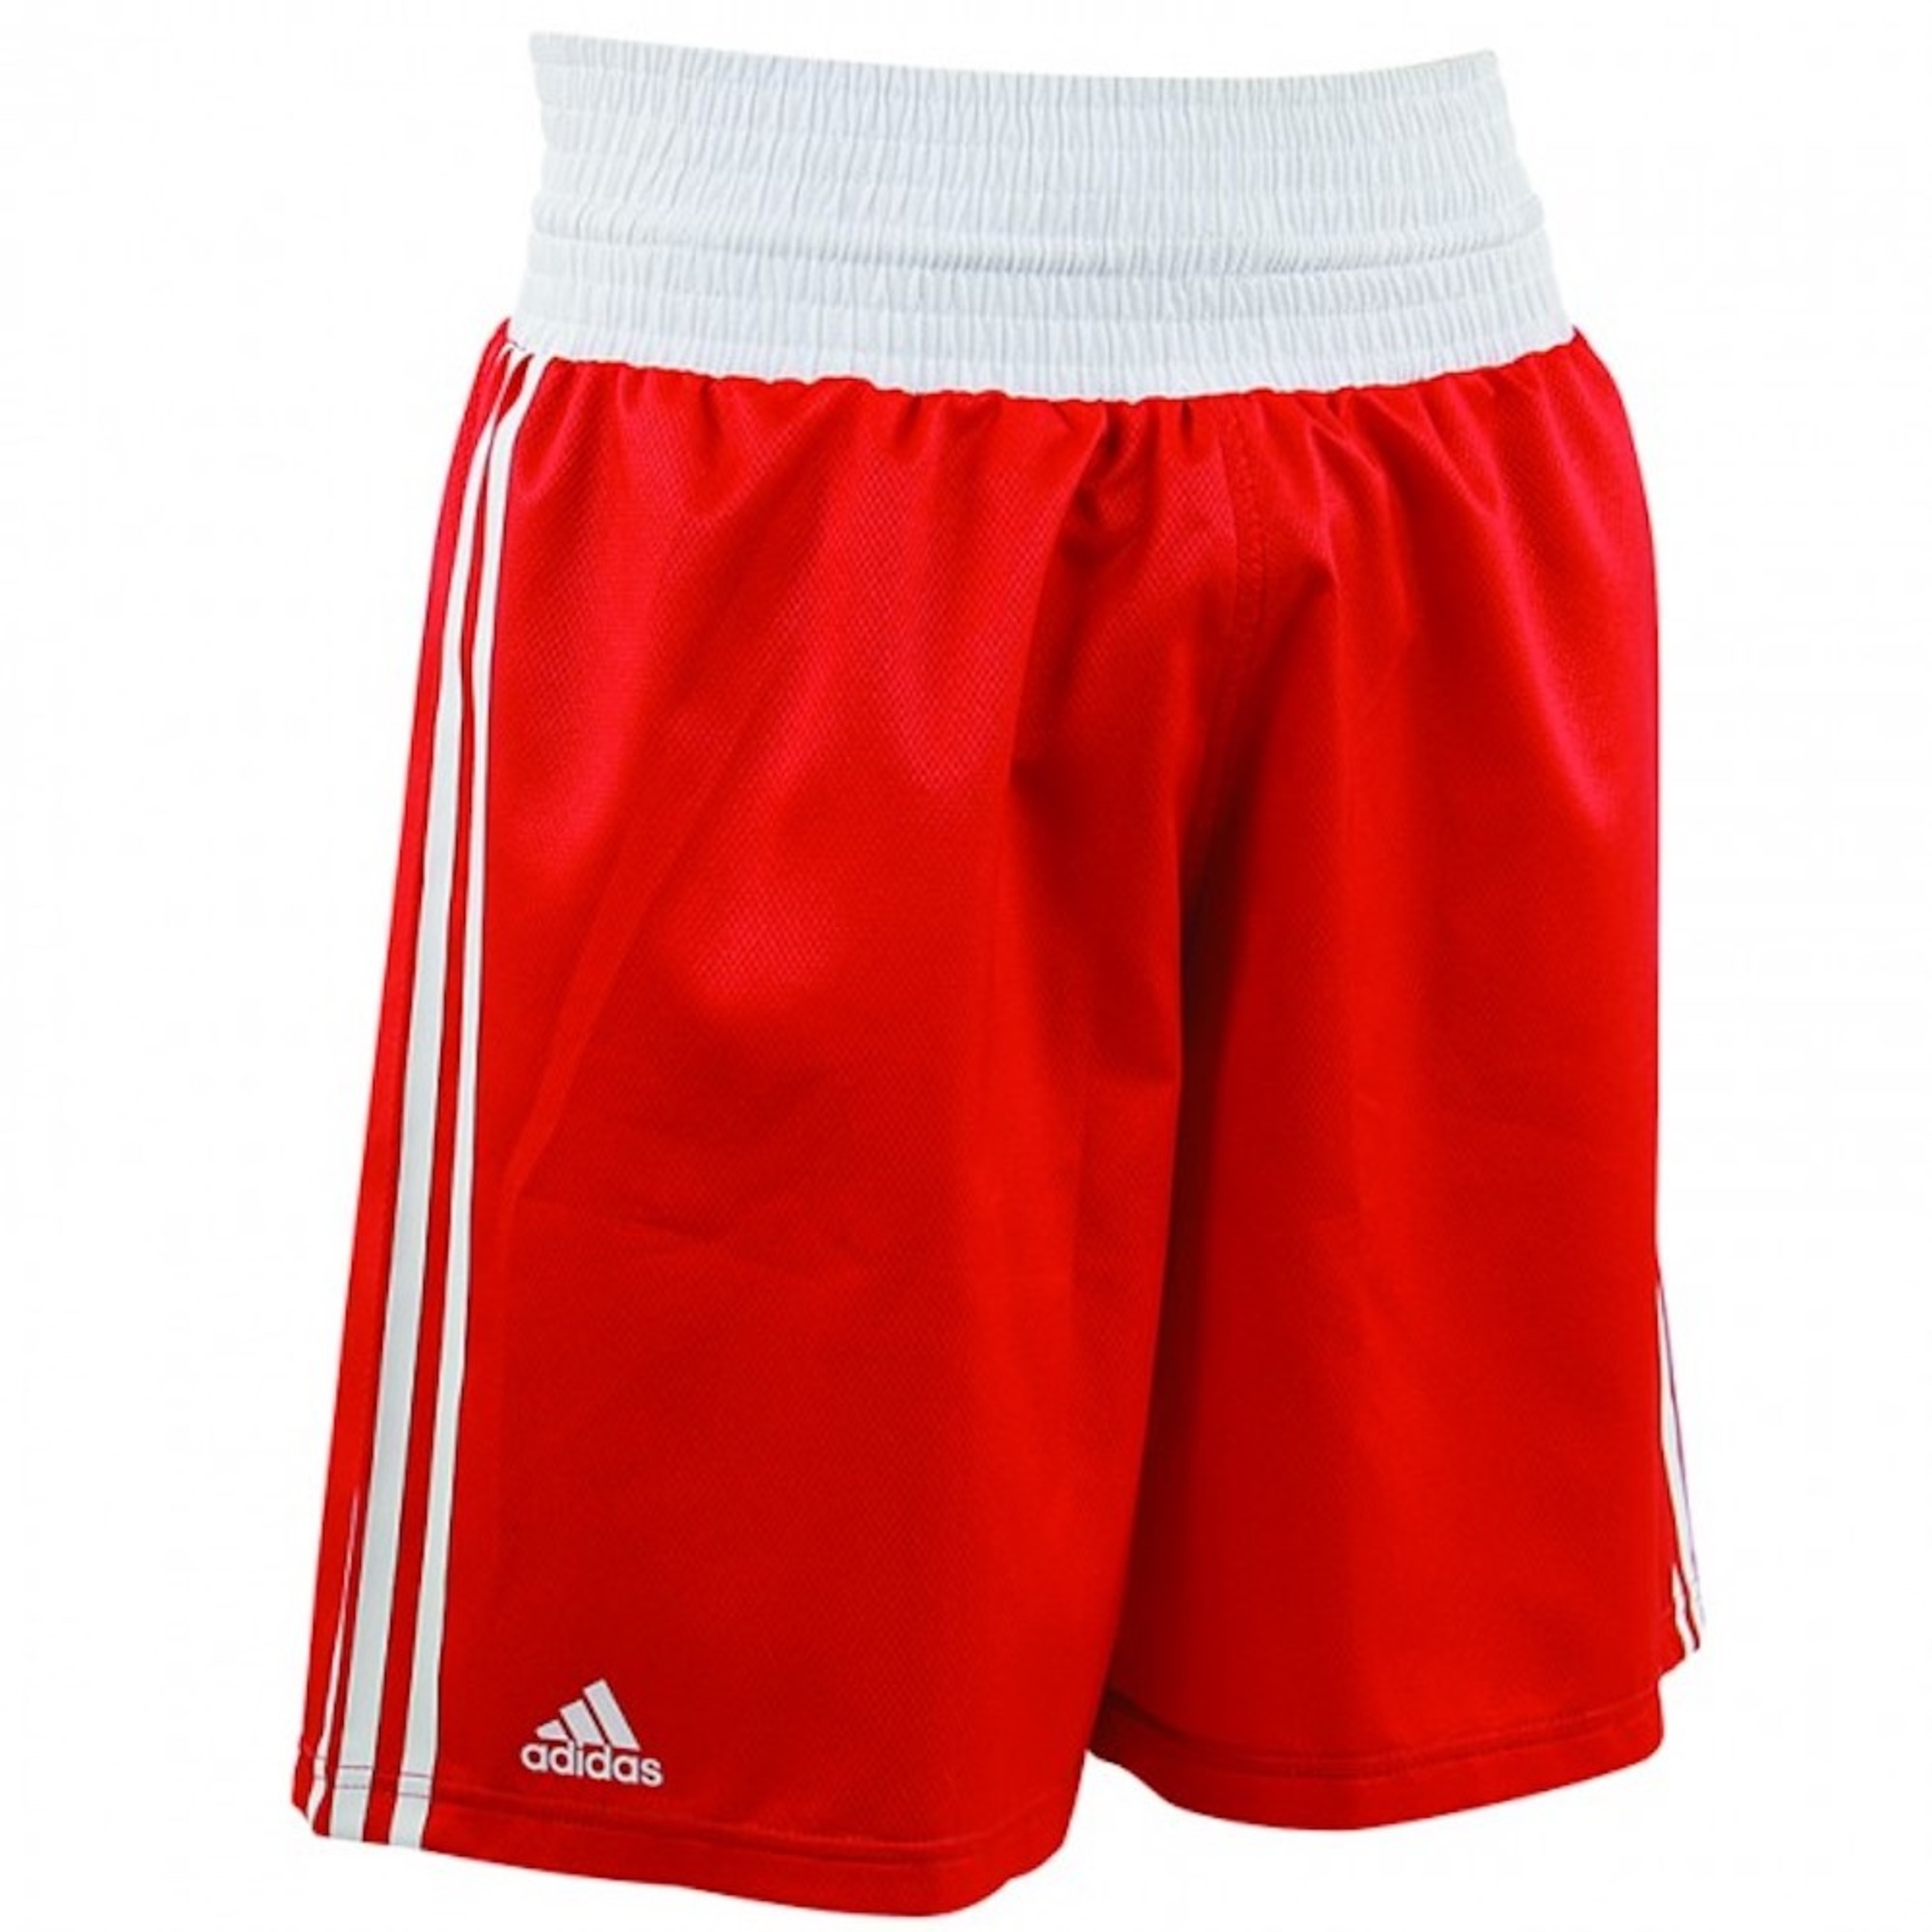 Adidas Amateur Boxing Shorts Red White Fightwear Shop Europe 